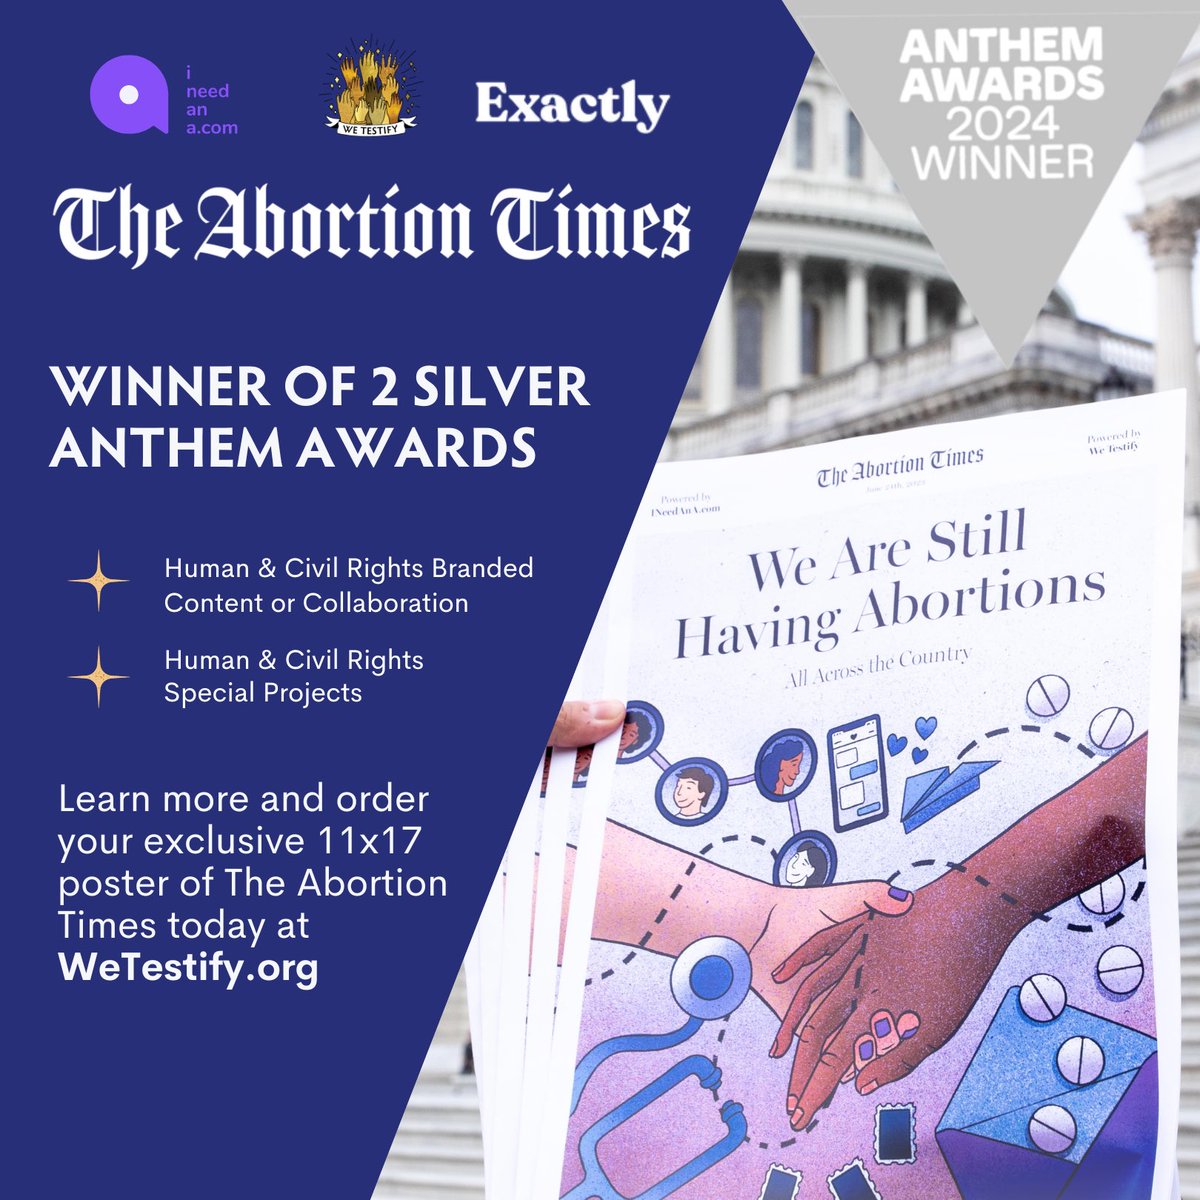 The Abortion Times was just awarded 2 Silver @AnthemAwards!! We partnered with @i_need_an_a and @exactlyagency to create this one of a kind publication filled with abortion stories and resources to remind everyone that we are still having abortions, all across the country ✊✨